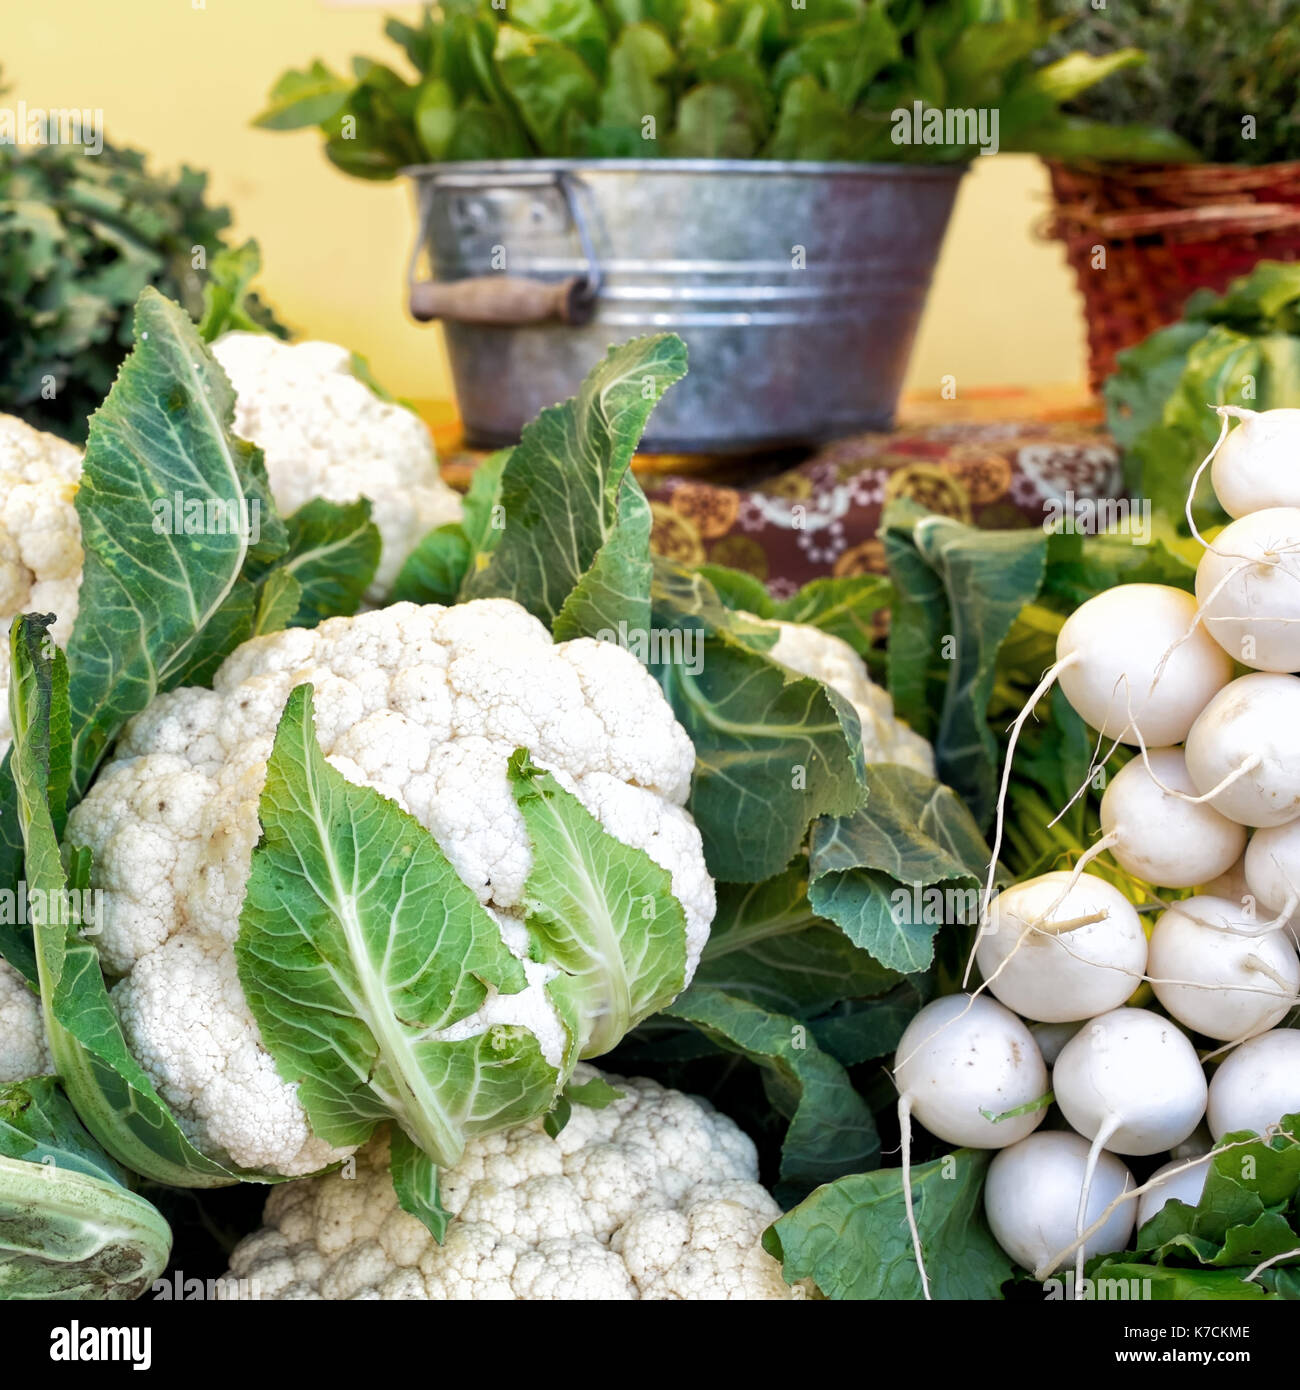 Cauliflower and white turnips at a farmers market. Square format Stock Photo